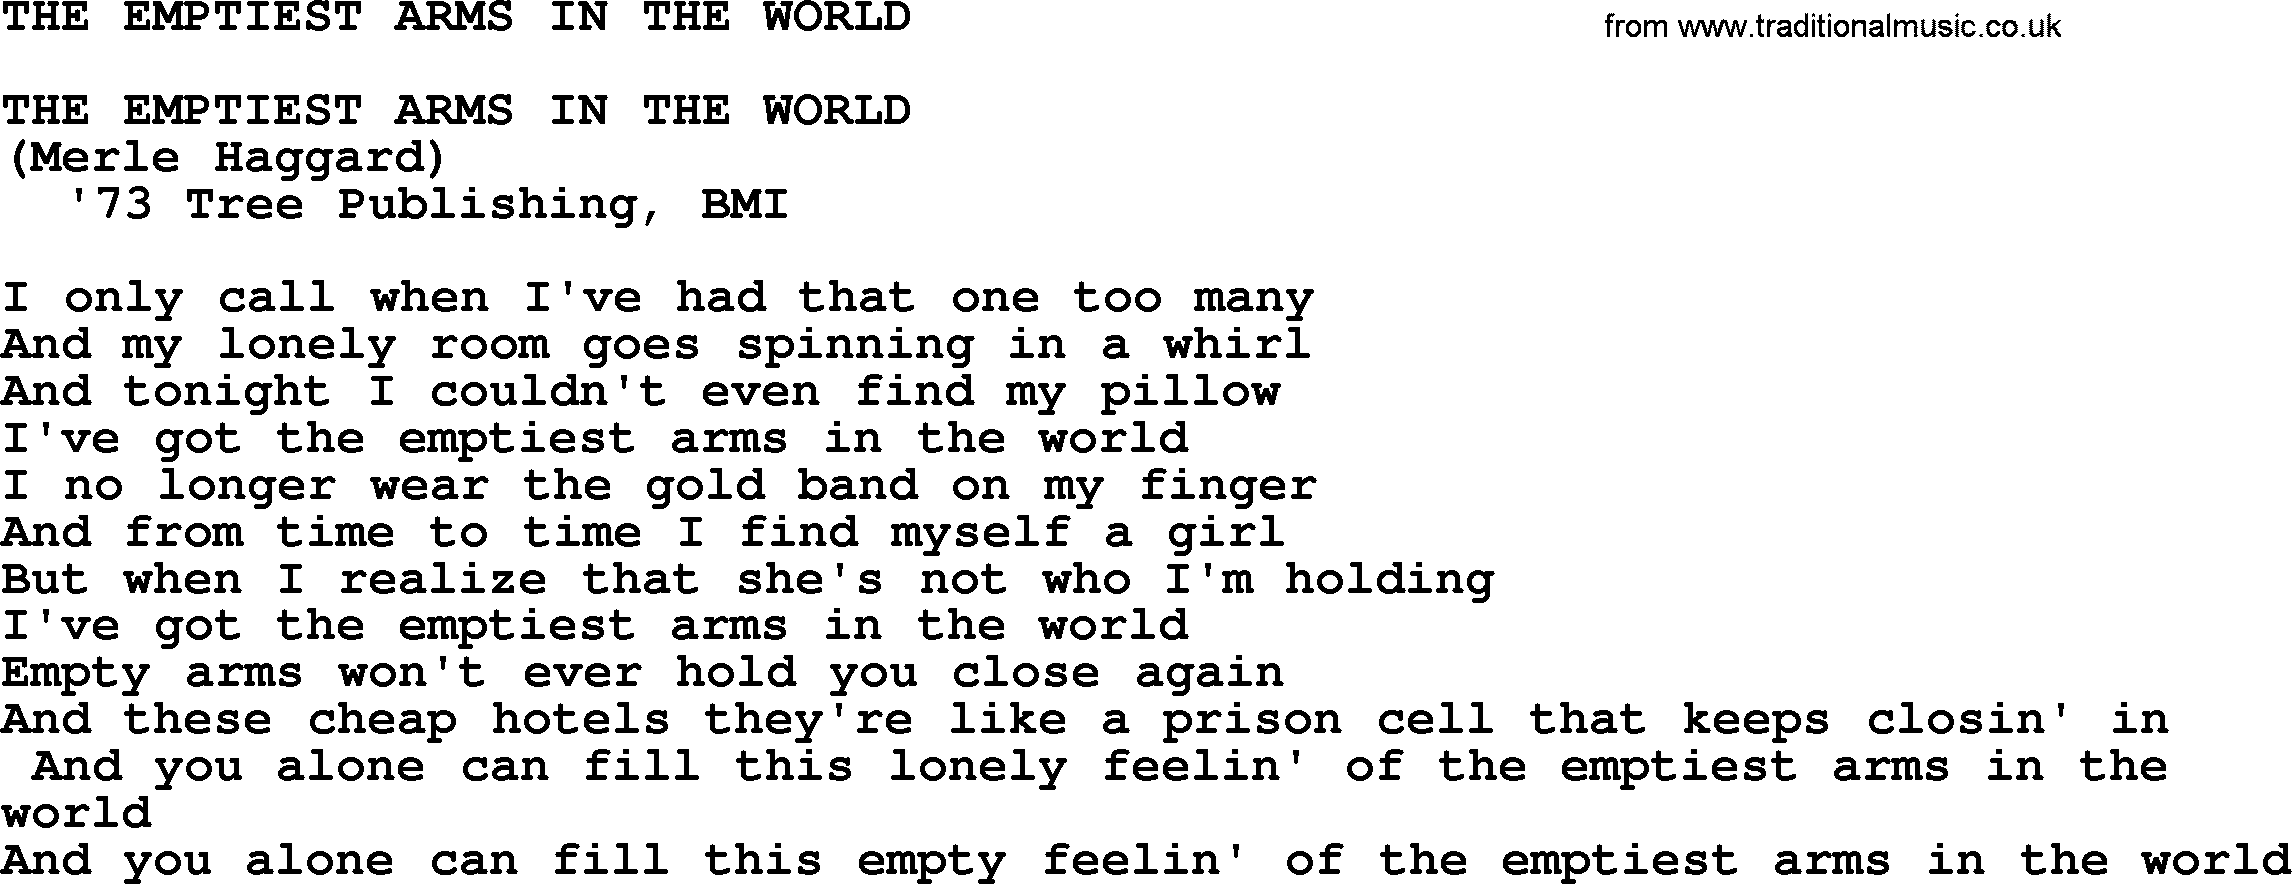 Merle Haggard song: The Emptiest Arms In The World, lyrics.